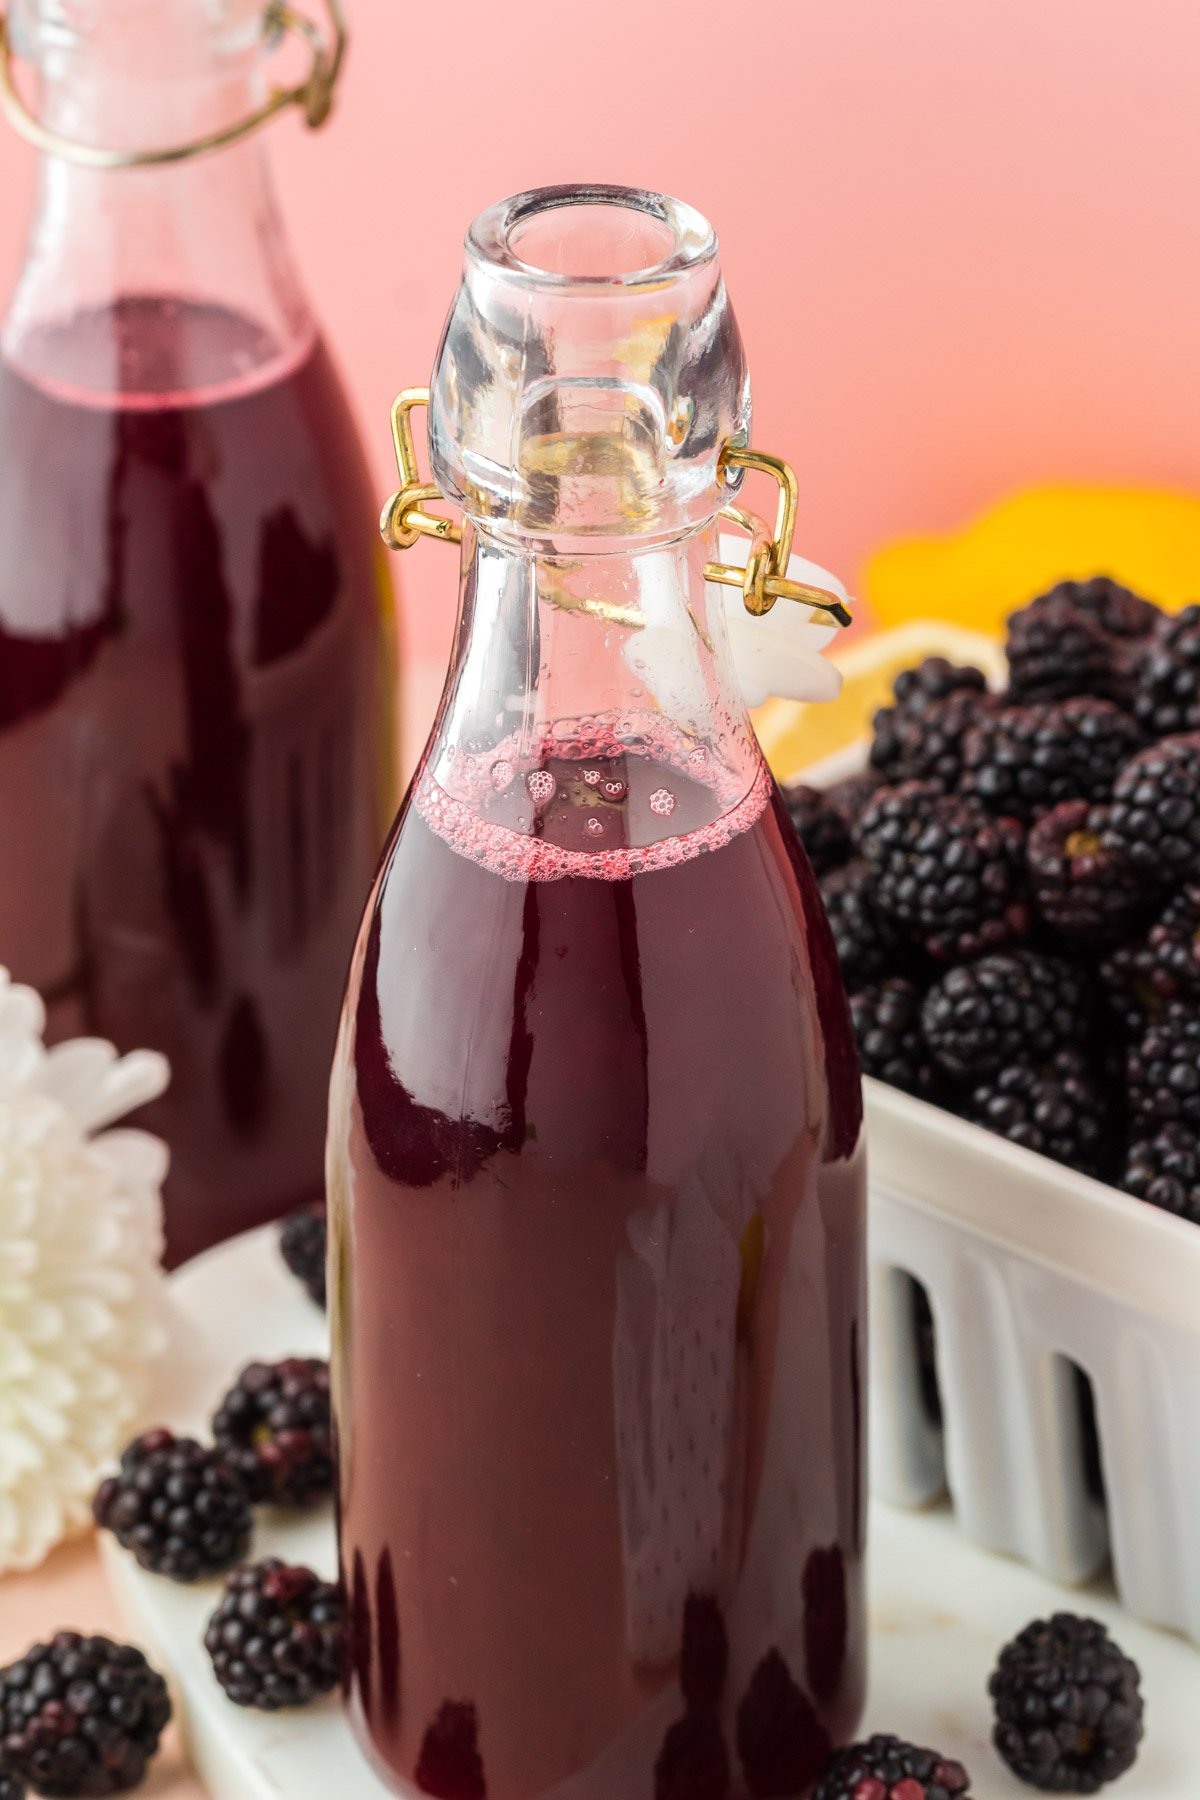 Close up of a bottle of blackberry simple syrup, another bottle and some berries in the background.